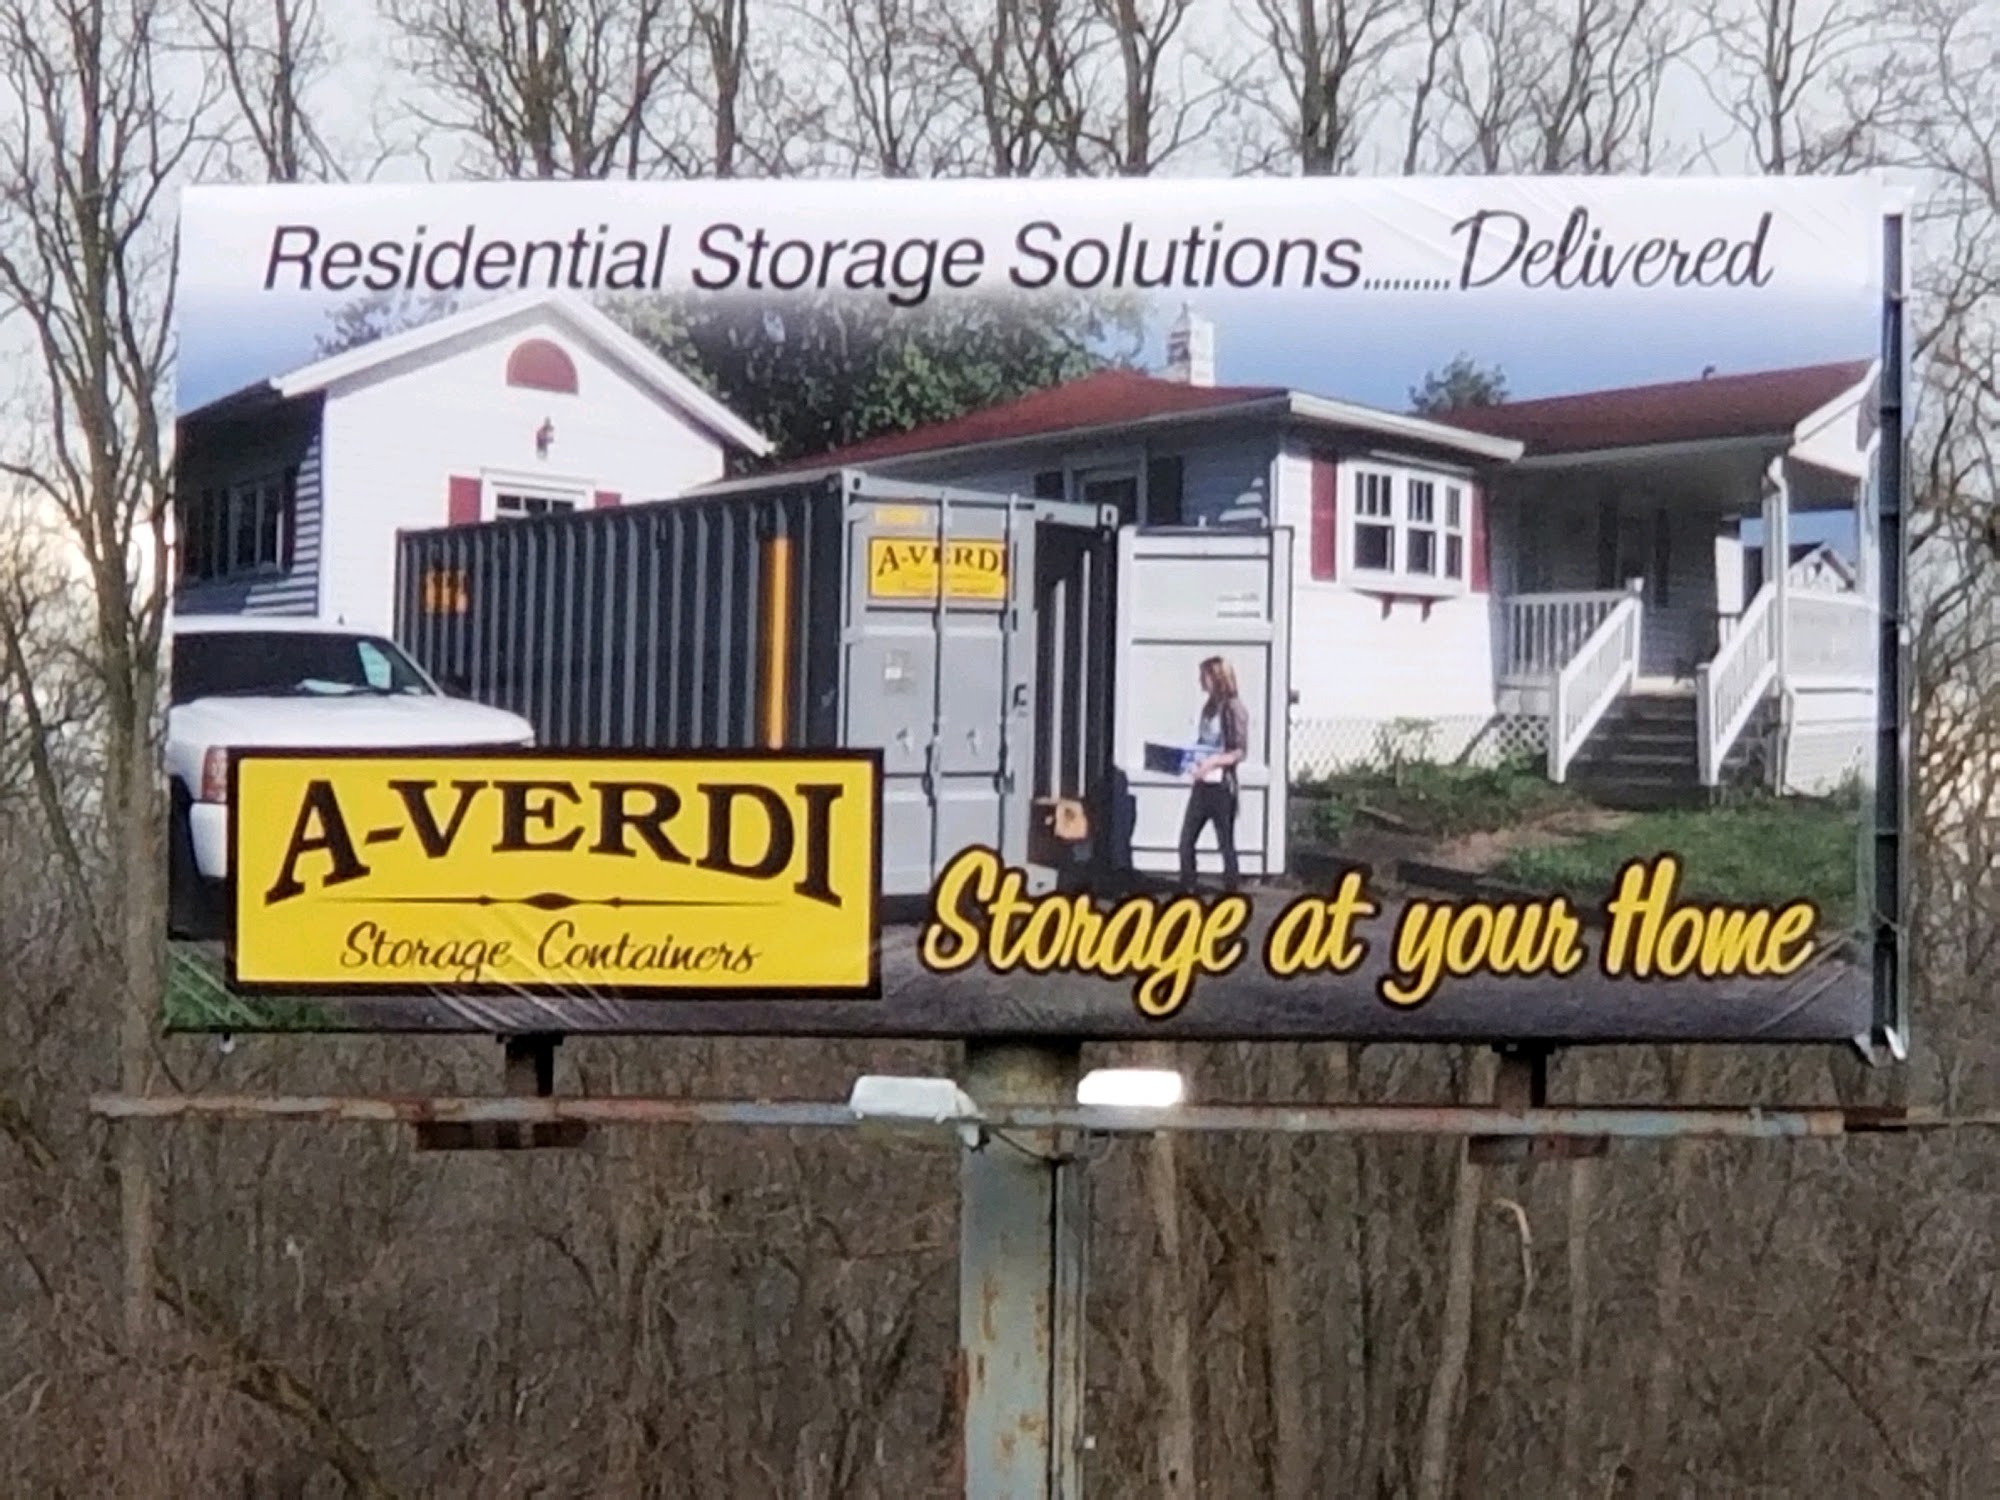 A-Verdi Storage Containers Albany